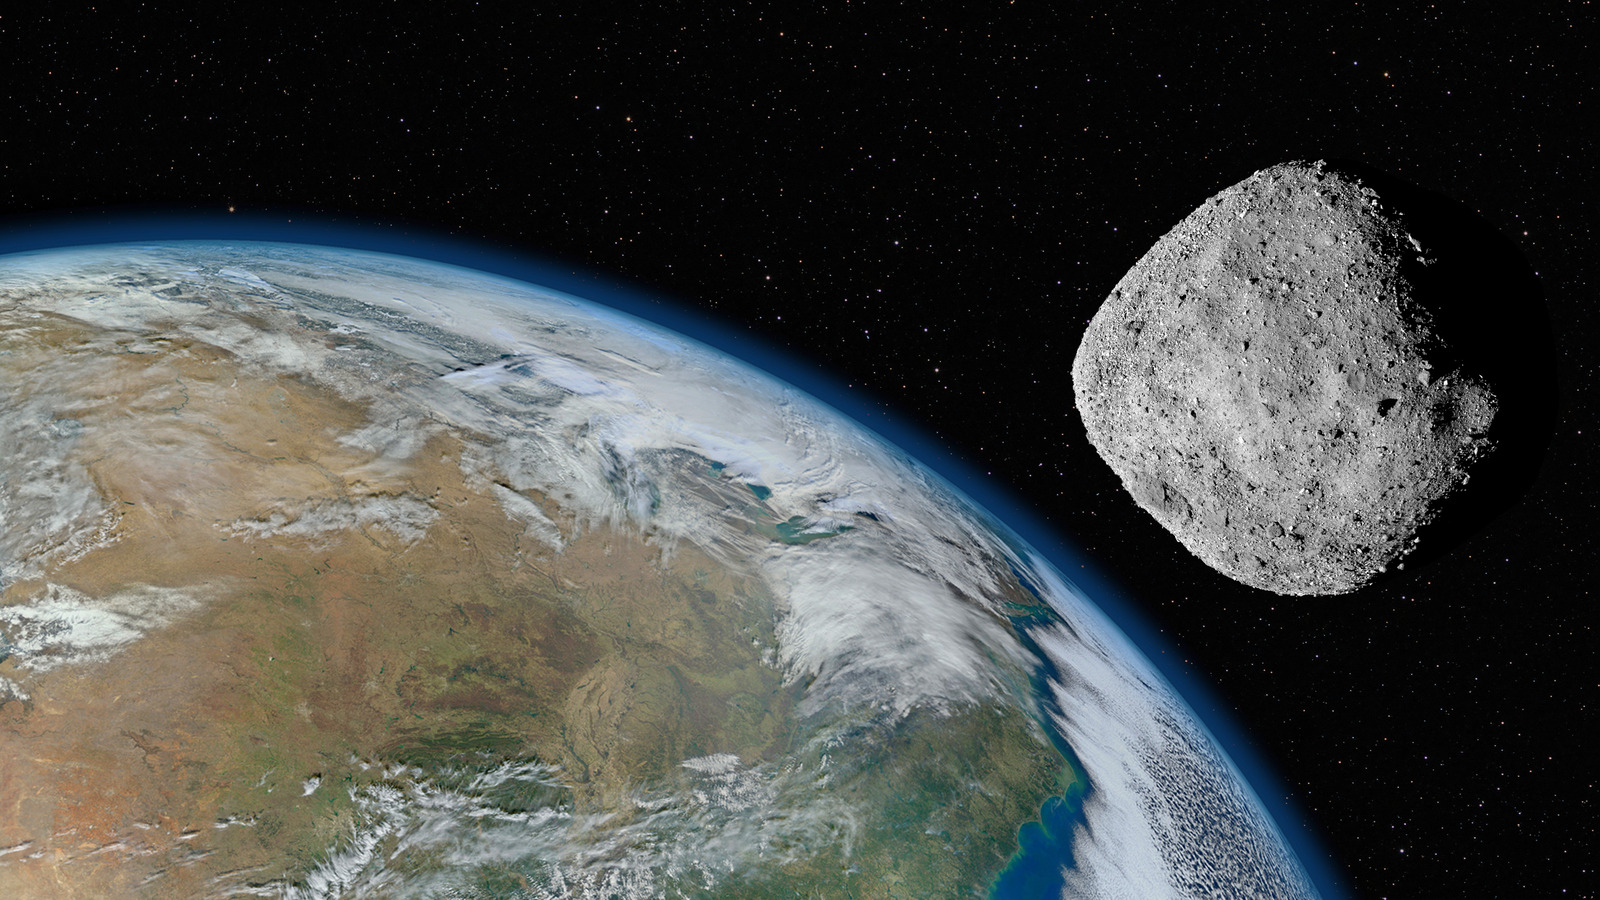 is the bennu asteroid really going to hit earth?